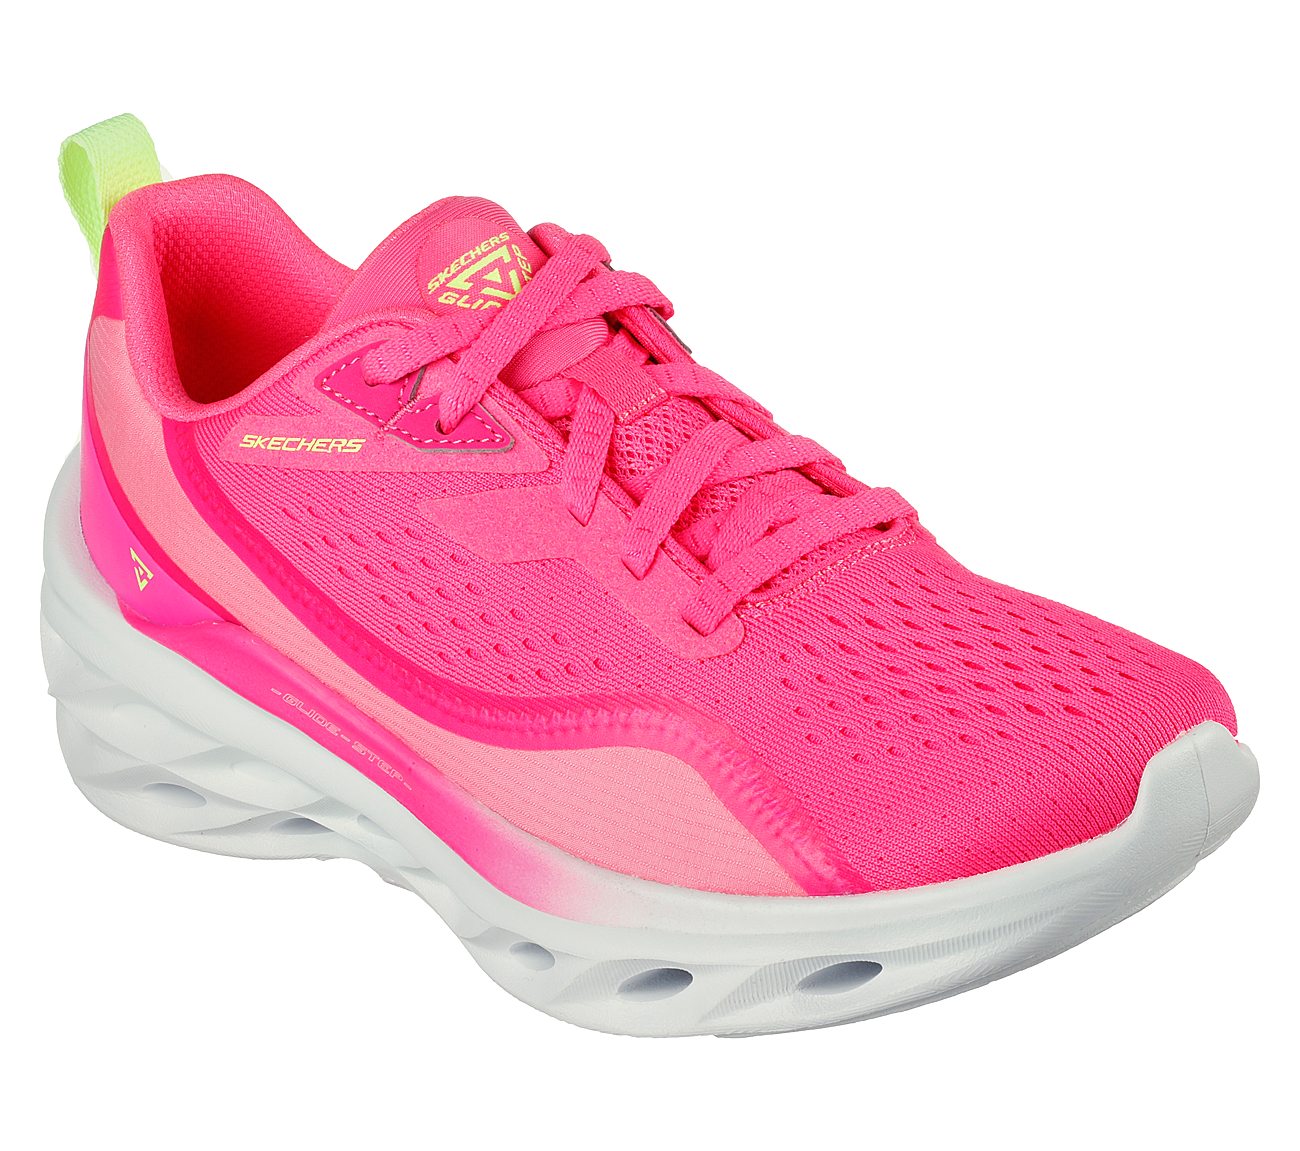 GLIDE-STEP SWIFT, NEON PINK/YELLOW Footwear Lateral View